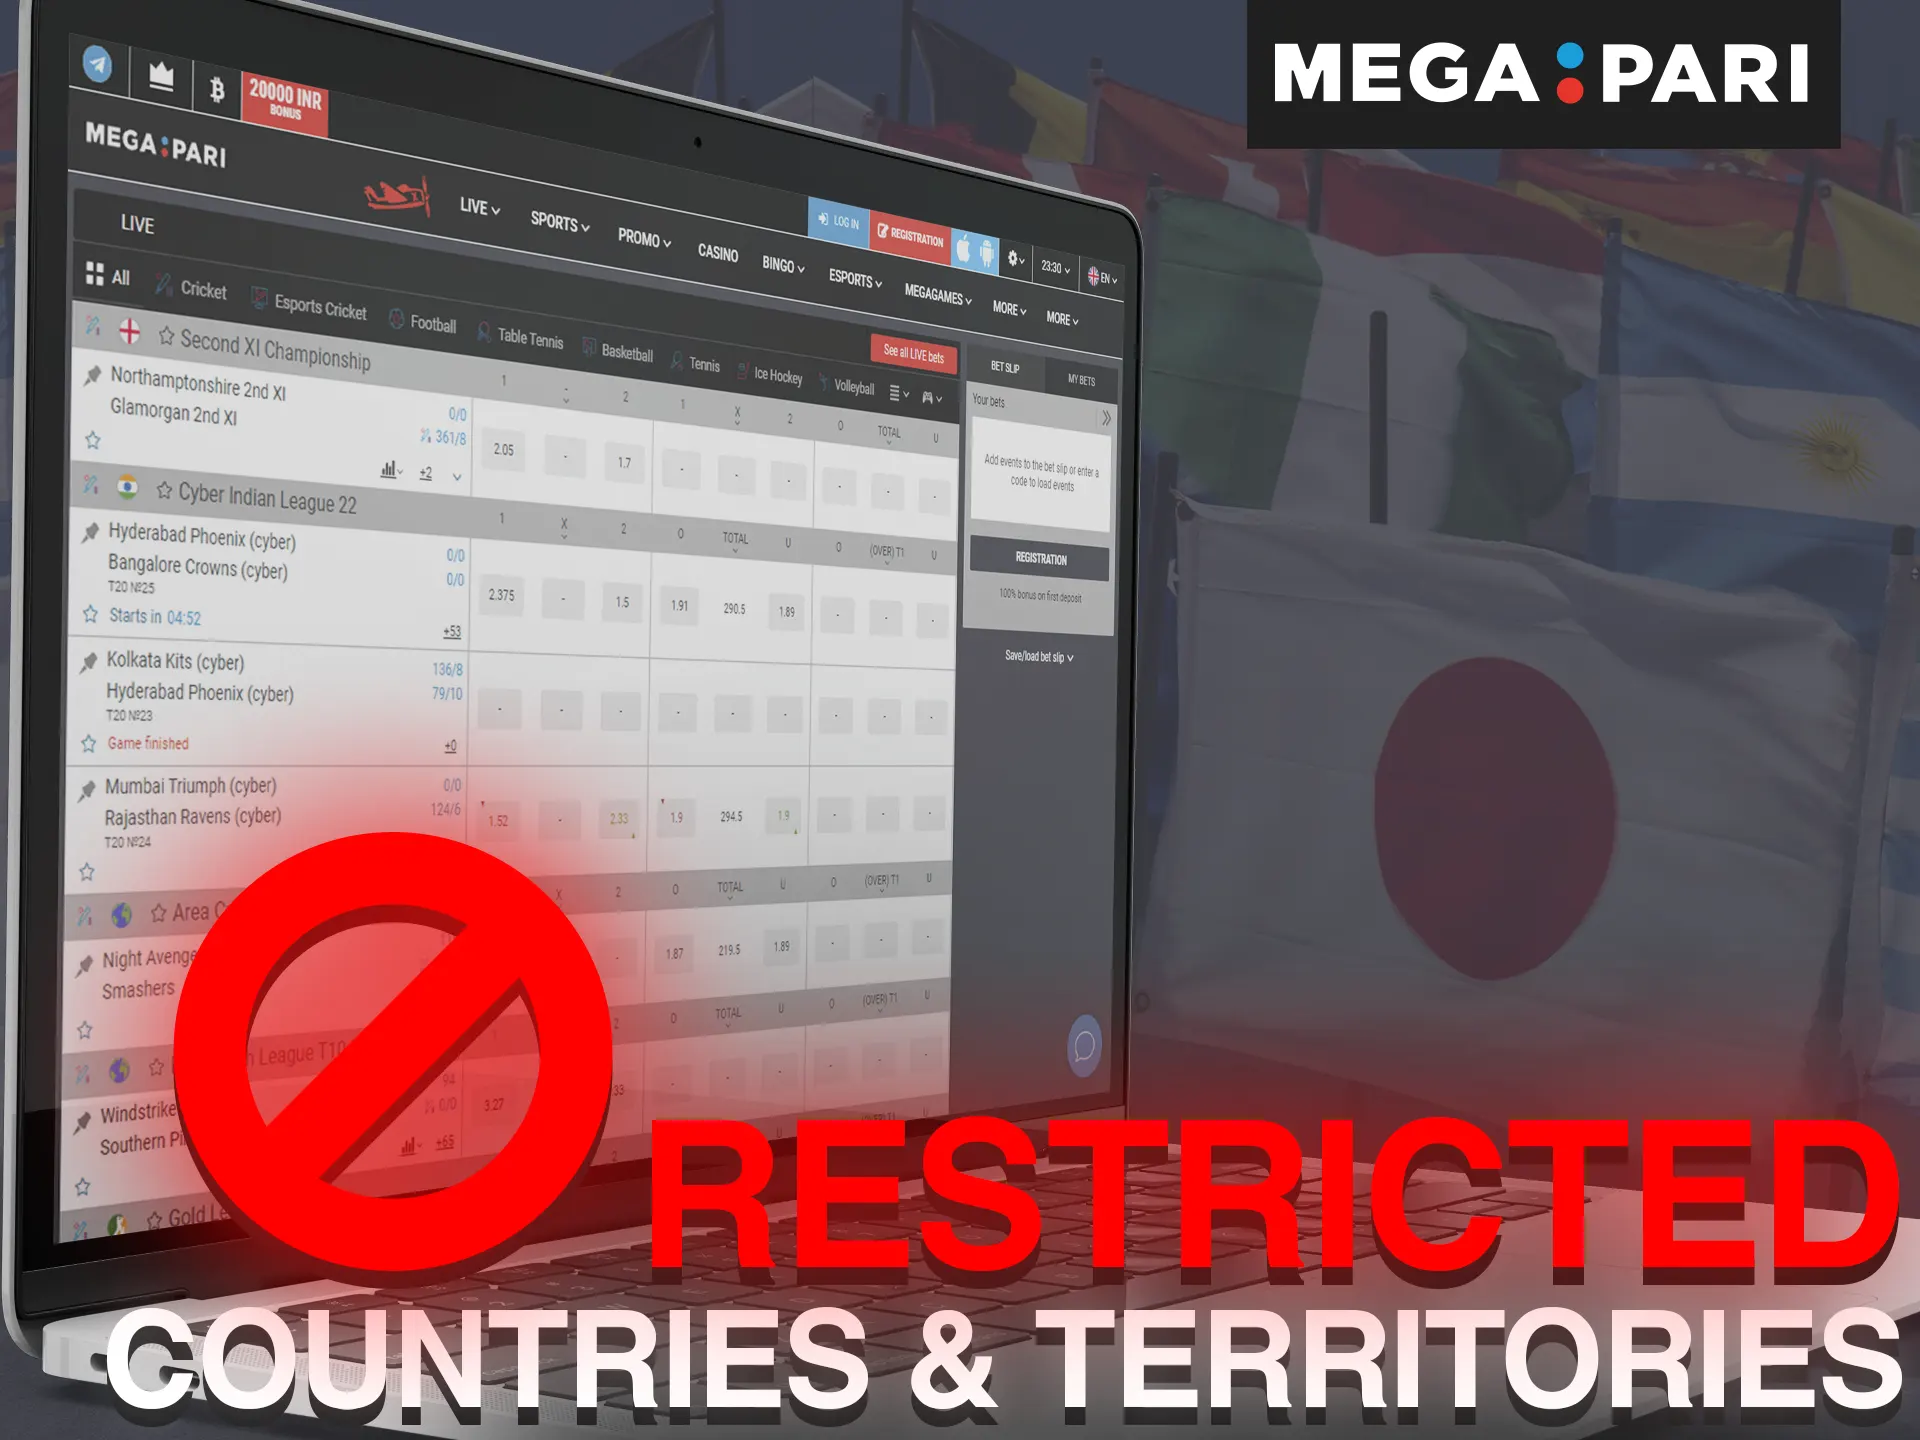 Unfortunately, due to the various regulations surrounding online gambling across the world, many jurisdictions have prohibited access to the Megapari website.